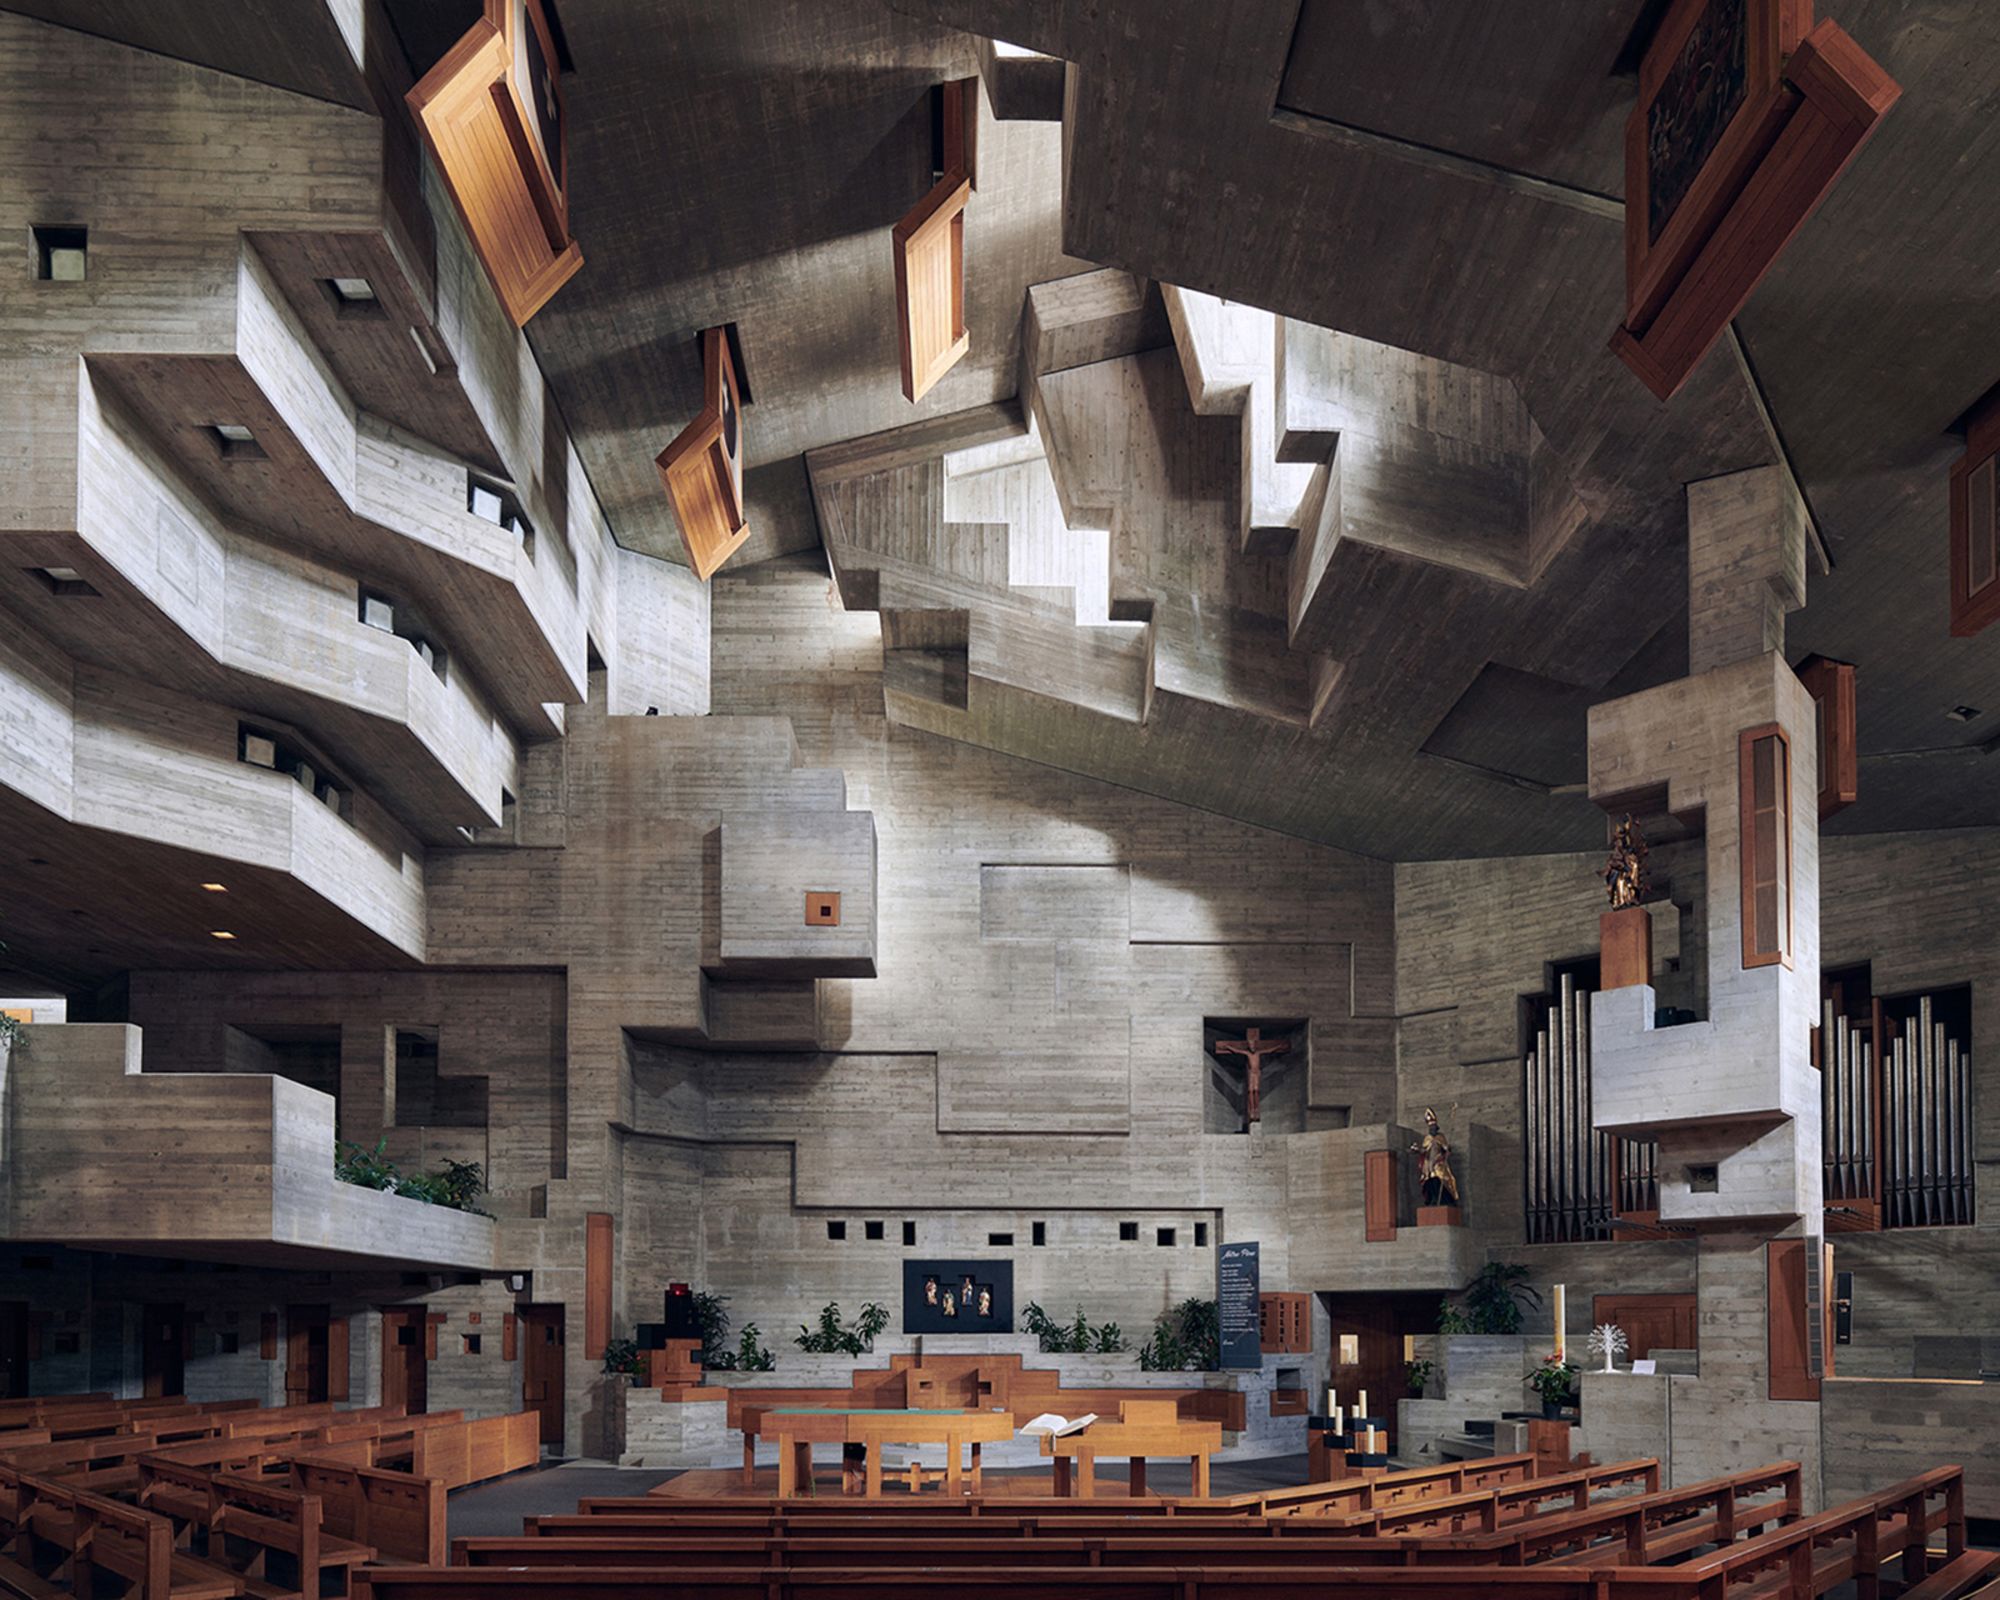 L'église Saint-Nicolas d'Hérémence in Switzerland was designed by Walter Maria Förderer and completed in 1971.